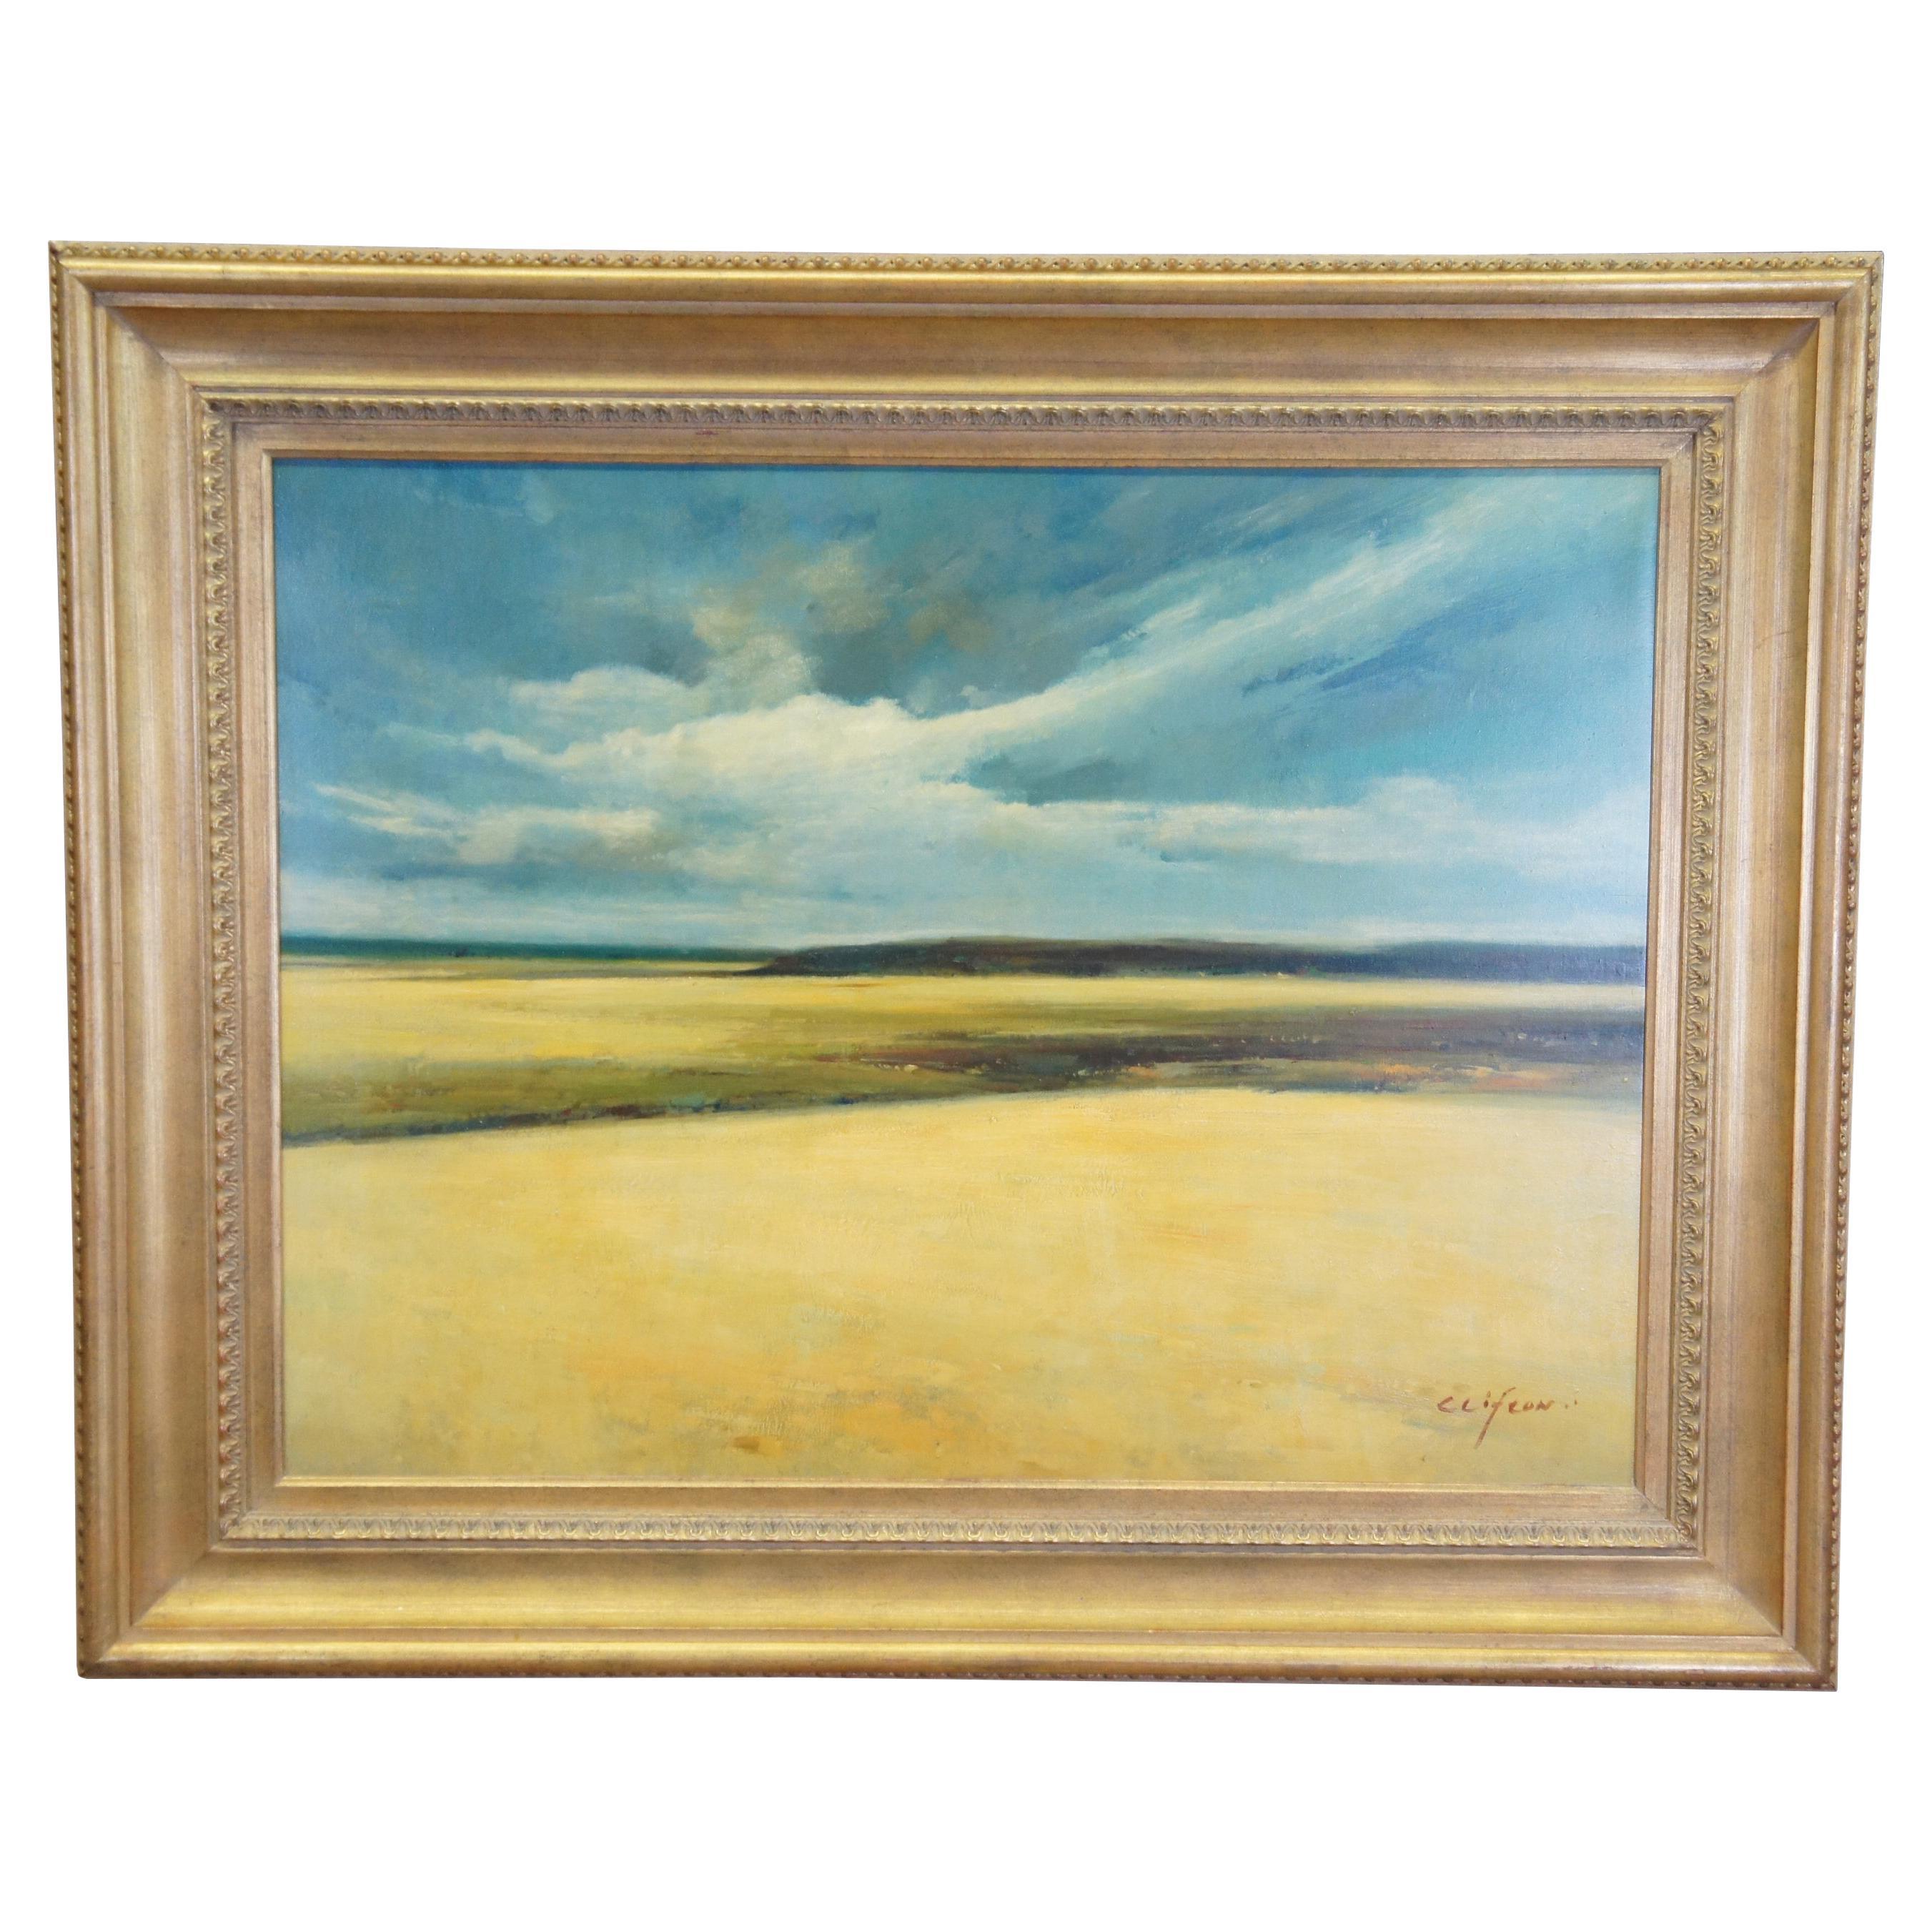 Zhao Huxie "Clifton" Impressionist Prairie Landscape Oil Painting Framed 52"